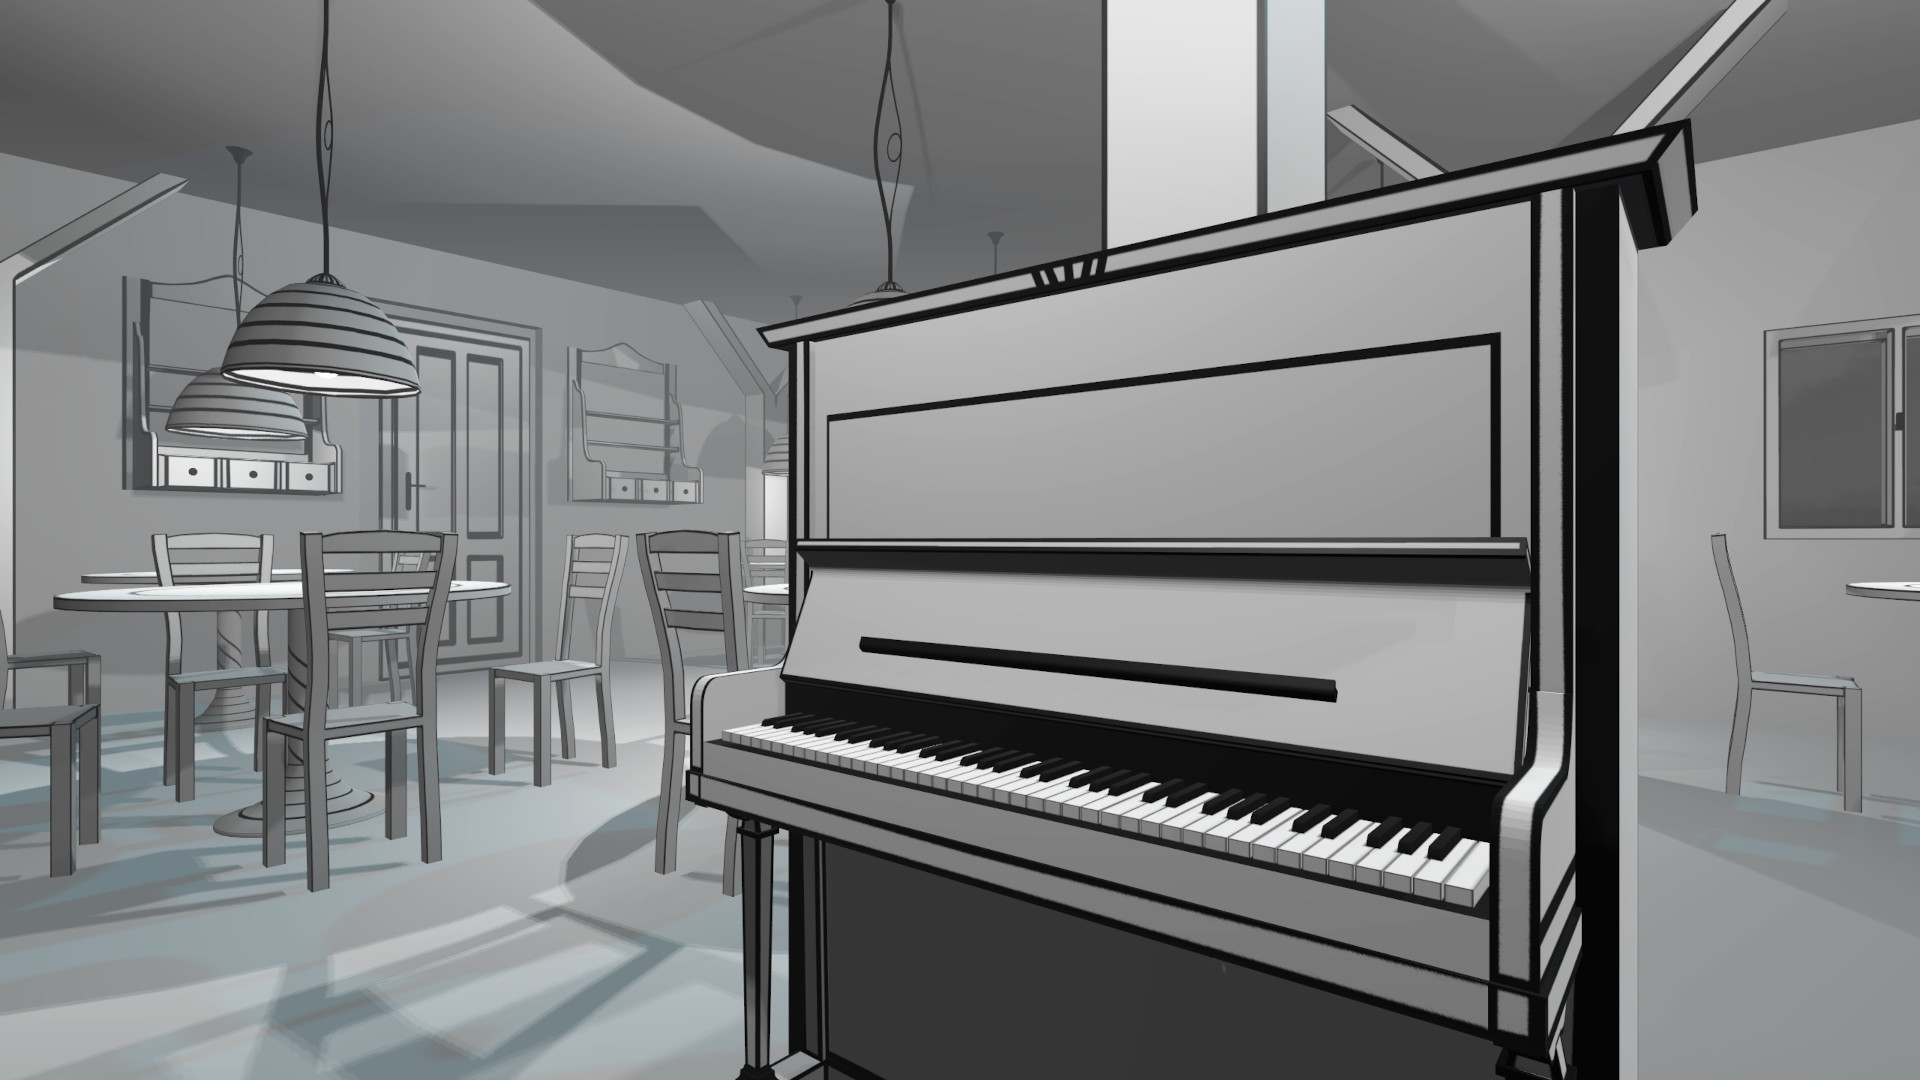 VR Pianist Free Download